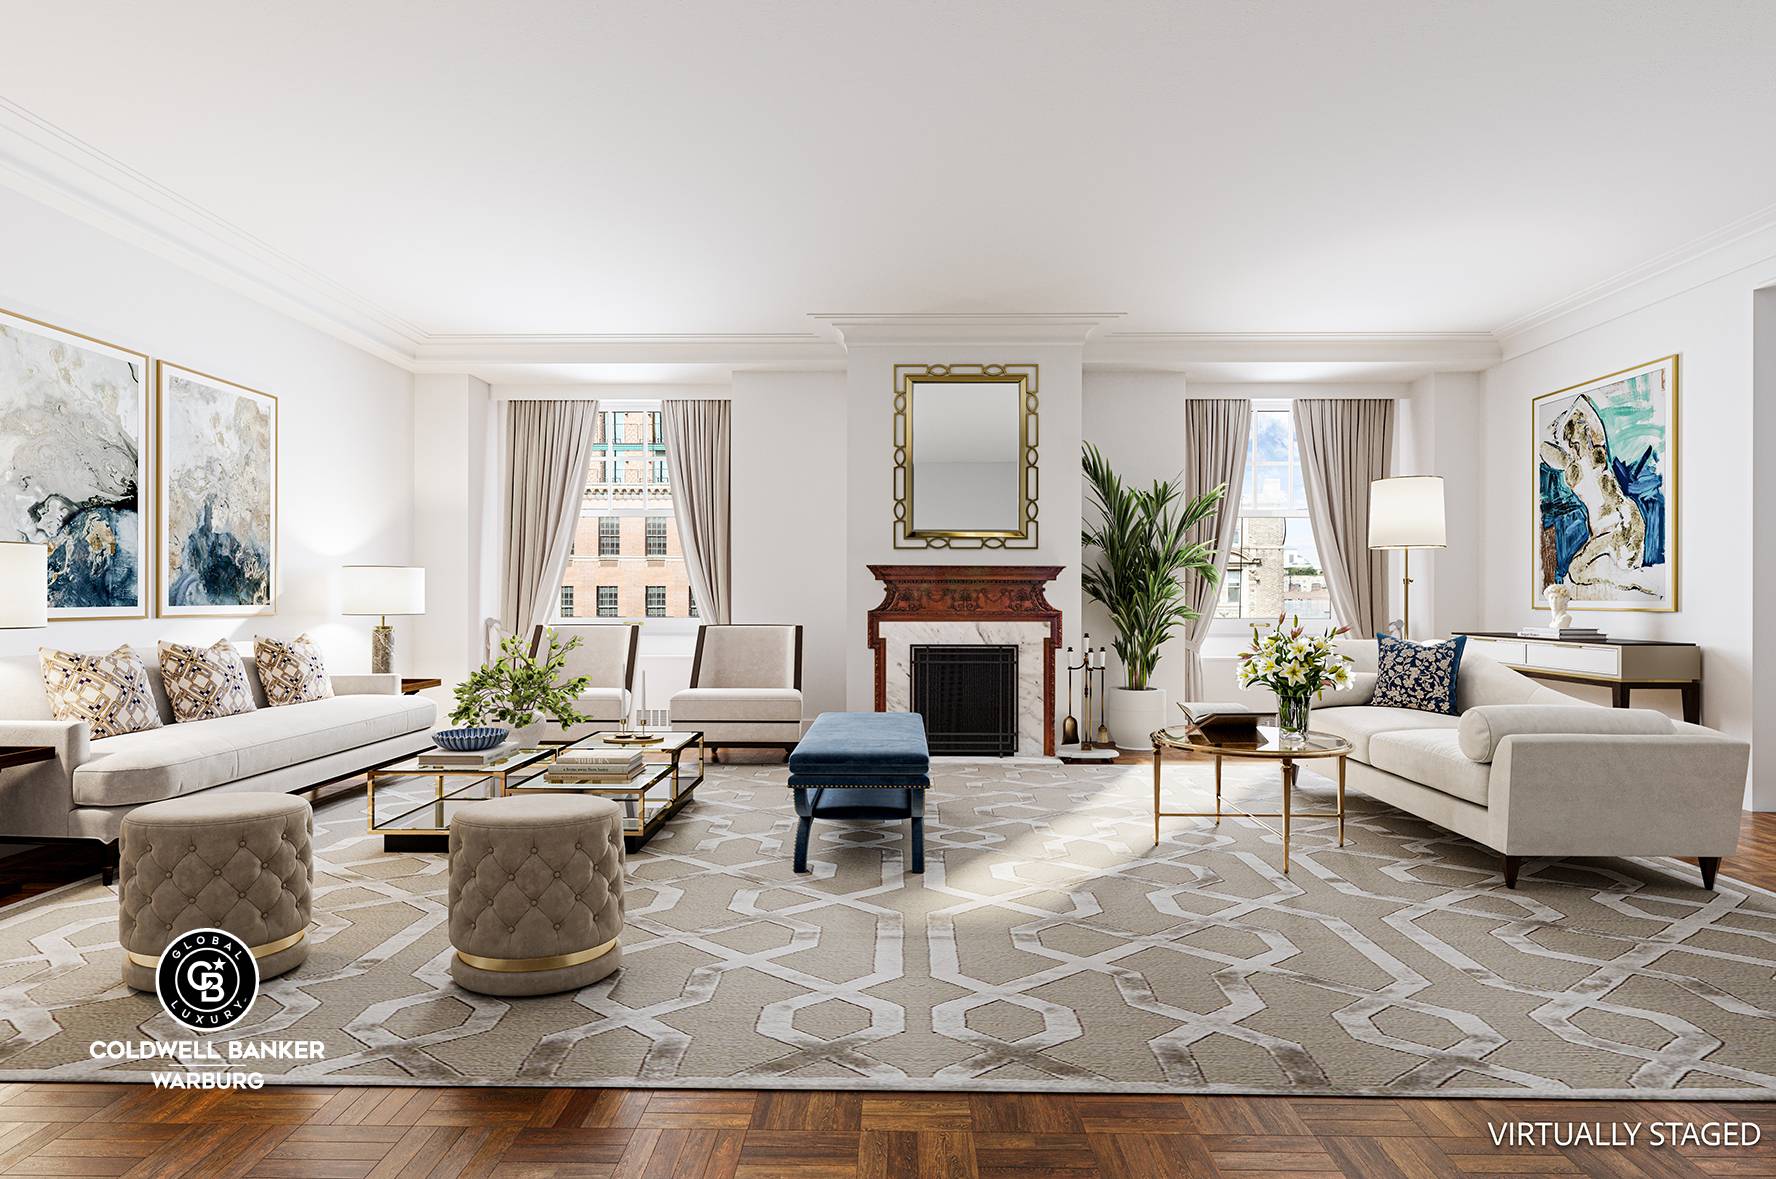 791 Park Avenue, 14th Floor On the 14th Floor of 791 Park Avenue sits a highly coveted 12 room, pre war masterpiece.